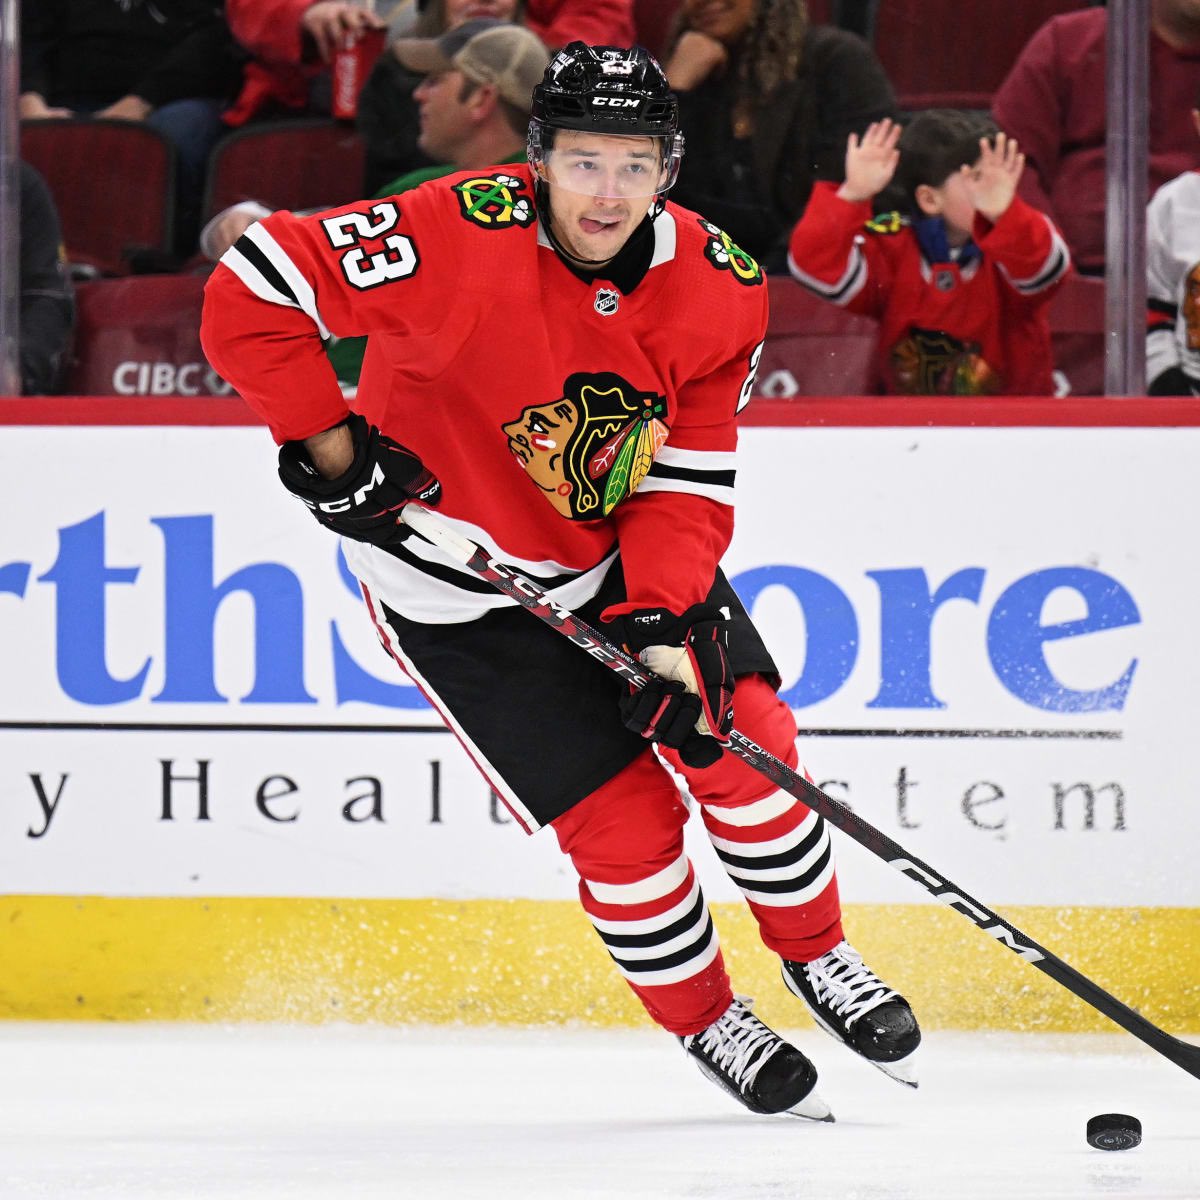 #NHL | Phillip Kurashev has signed a 2-year contract worth $2.25M with the Chicago Blackhawks through arbitration. #Blackhawks https://t.co/2Kt8CsurTs